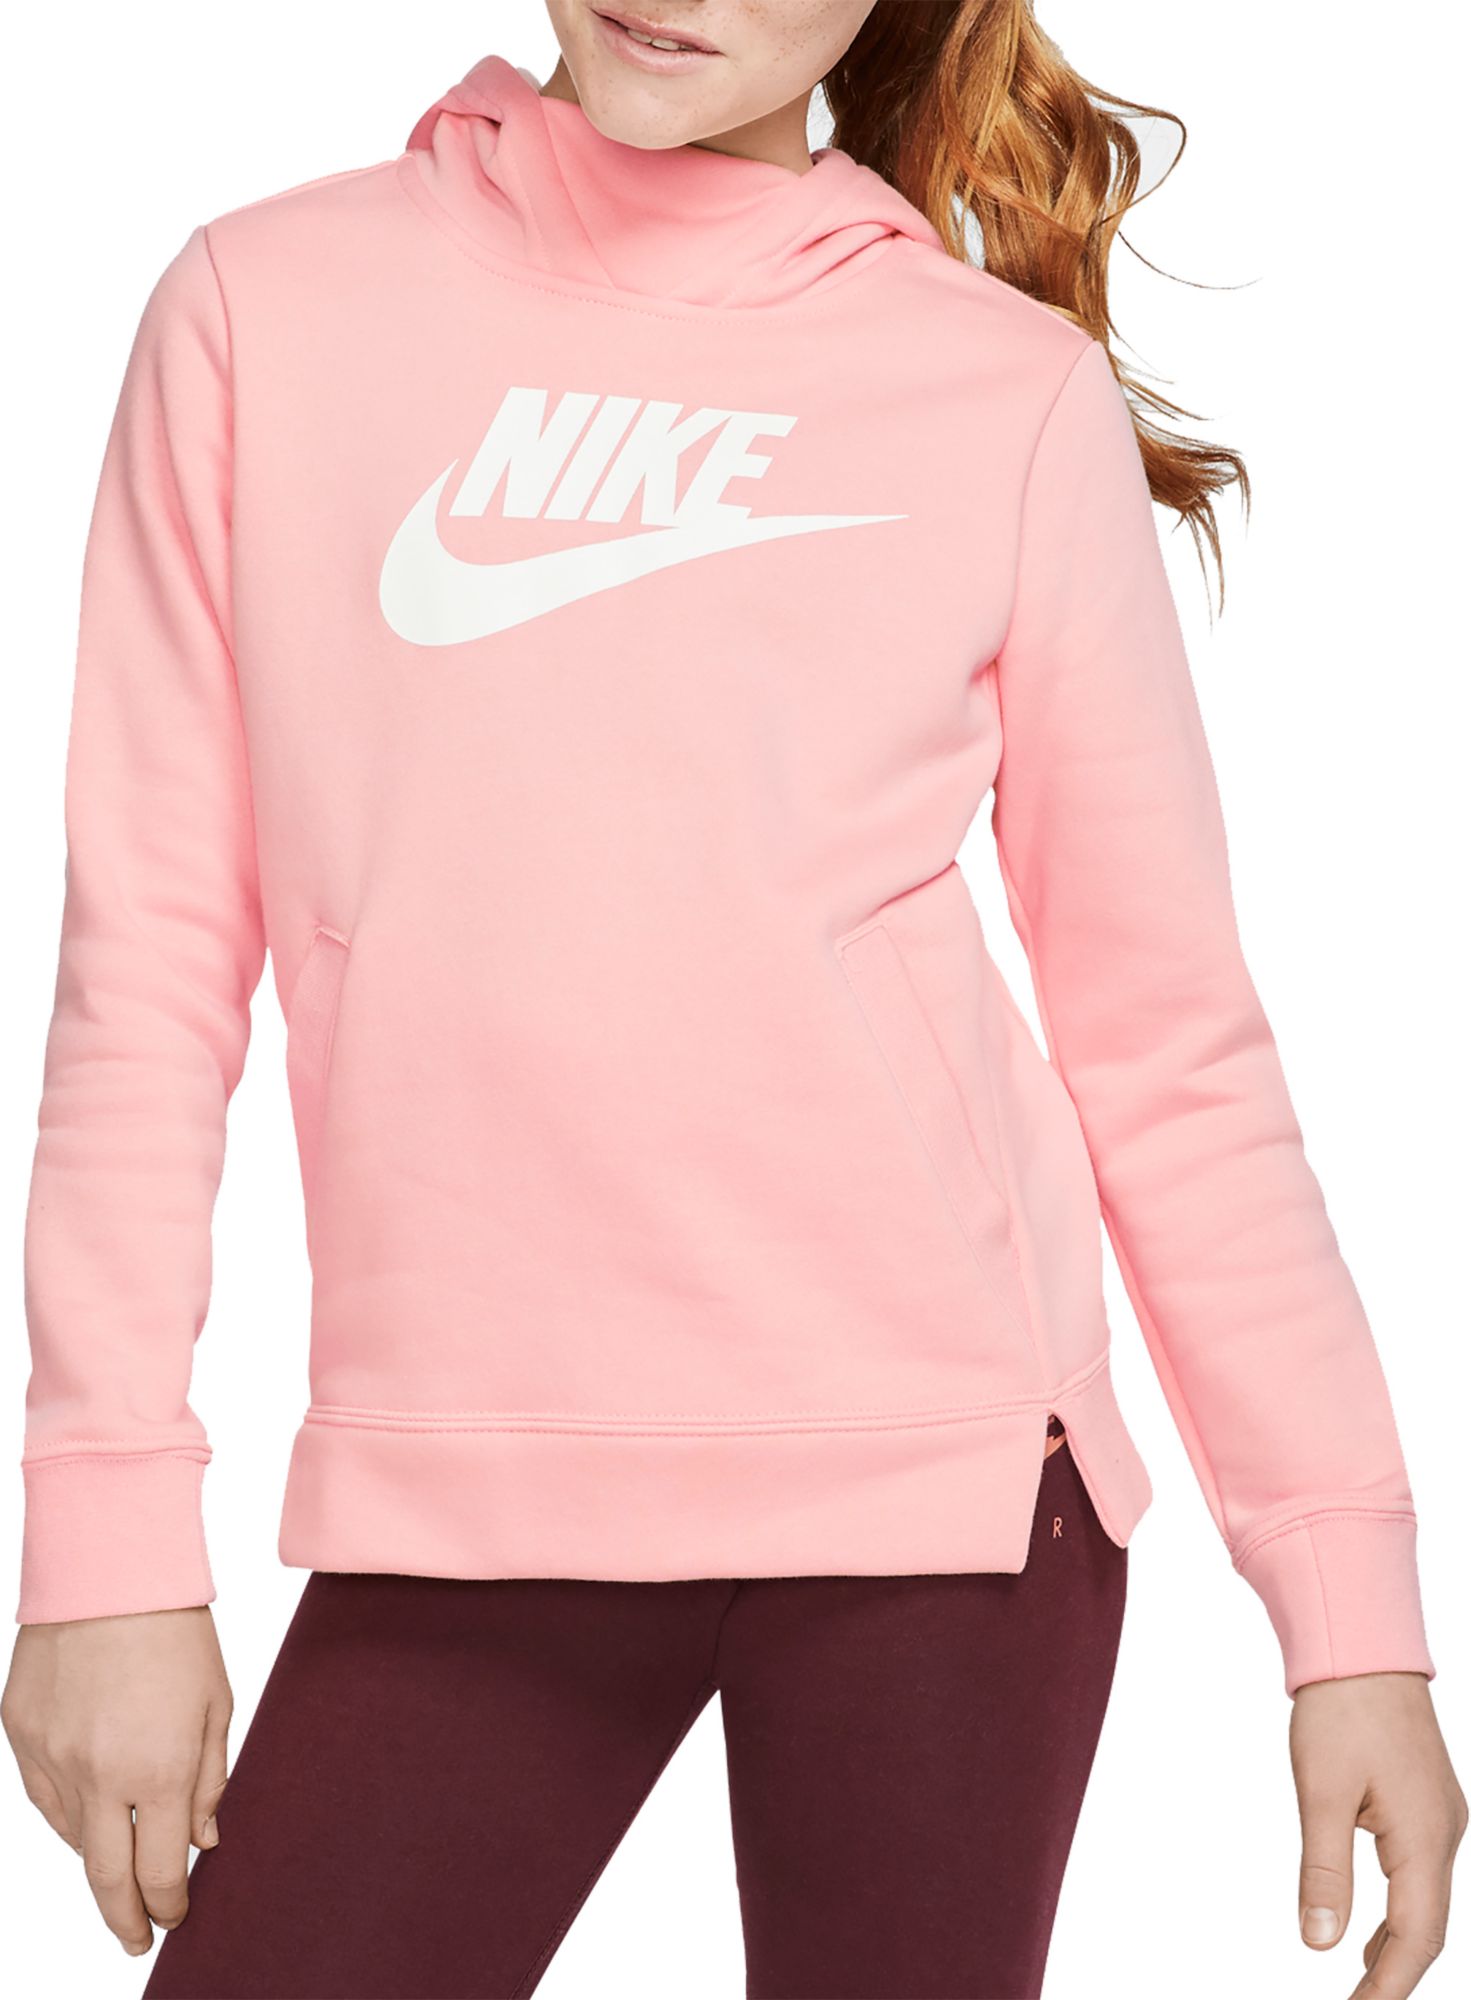 nike girl outfits